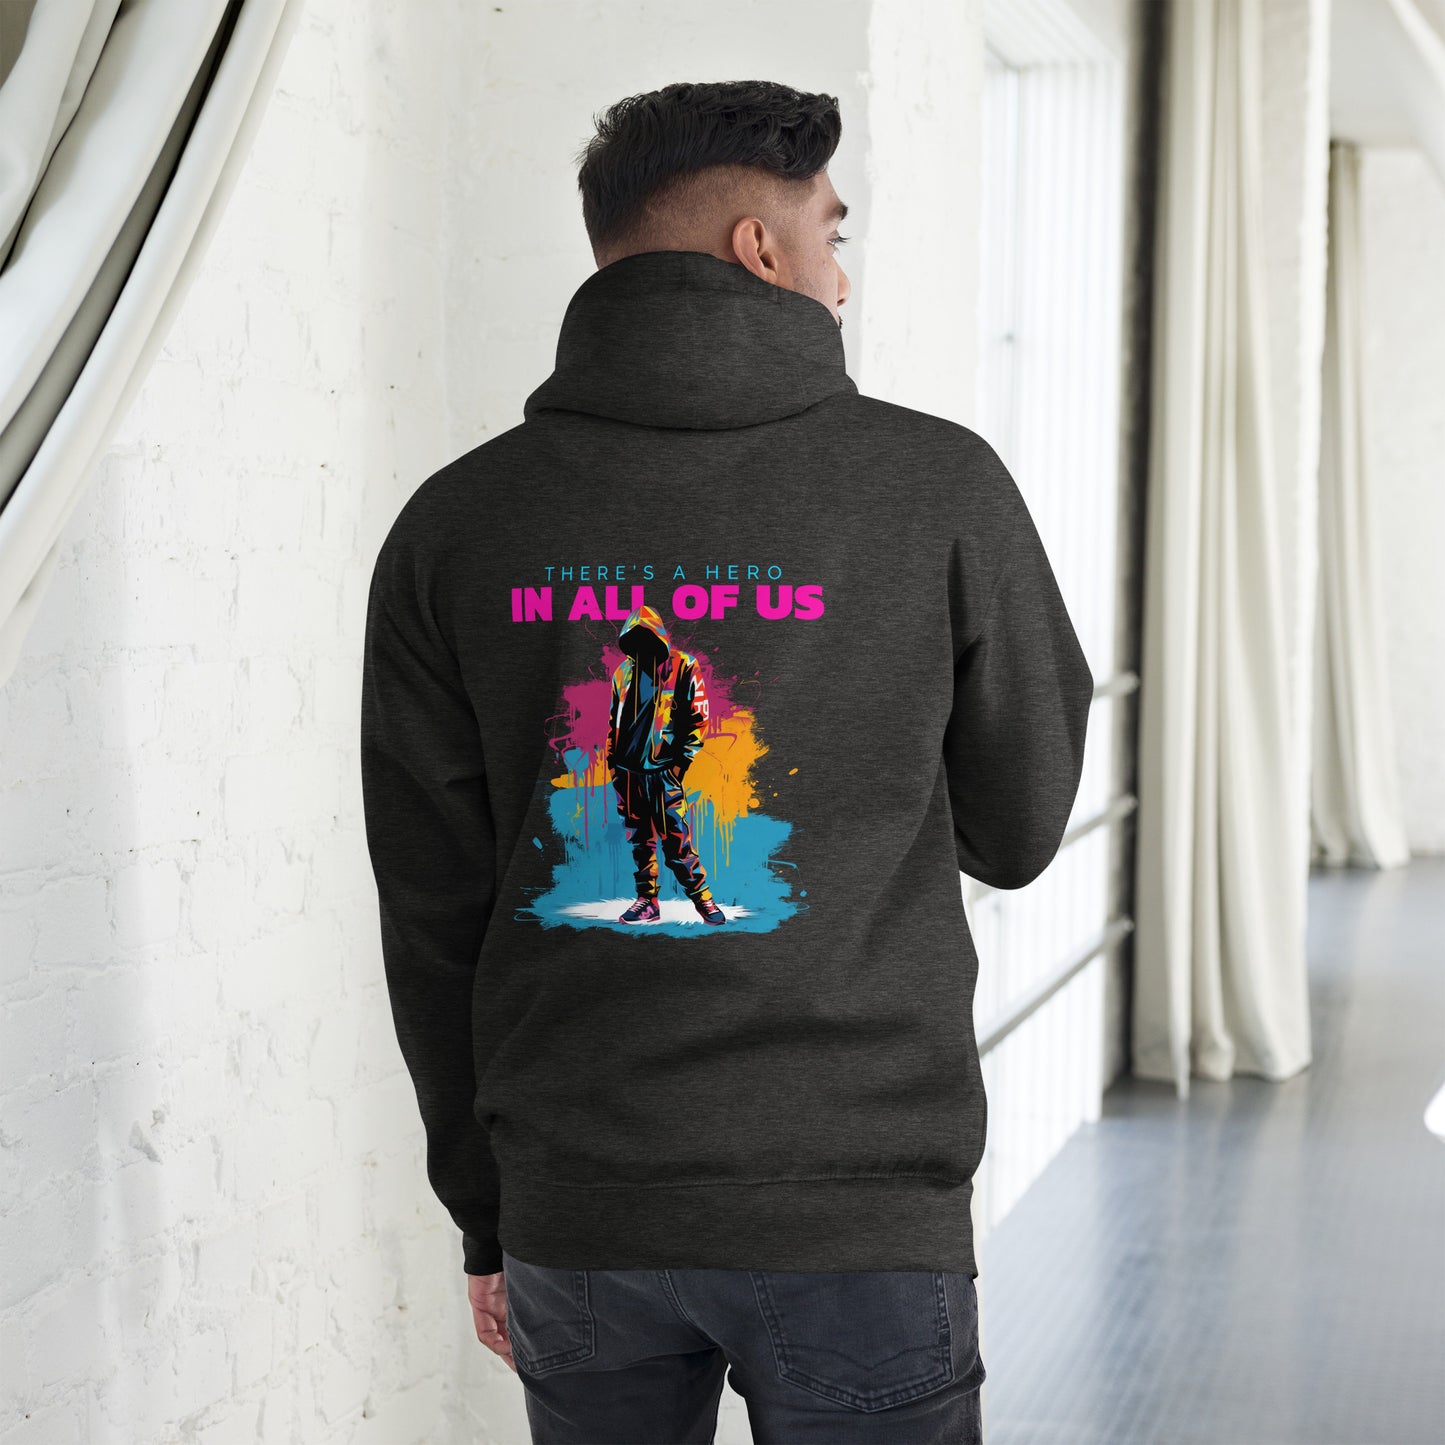 "There's a Hero in all of us" Unisex Hoodie